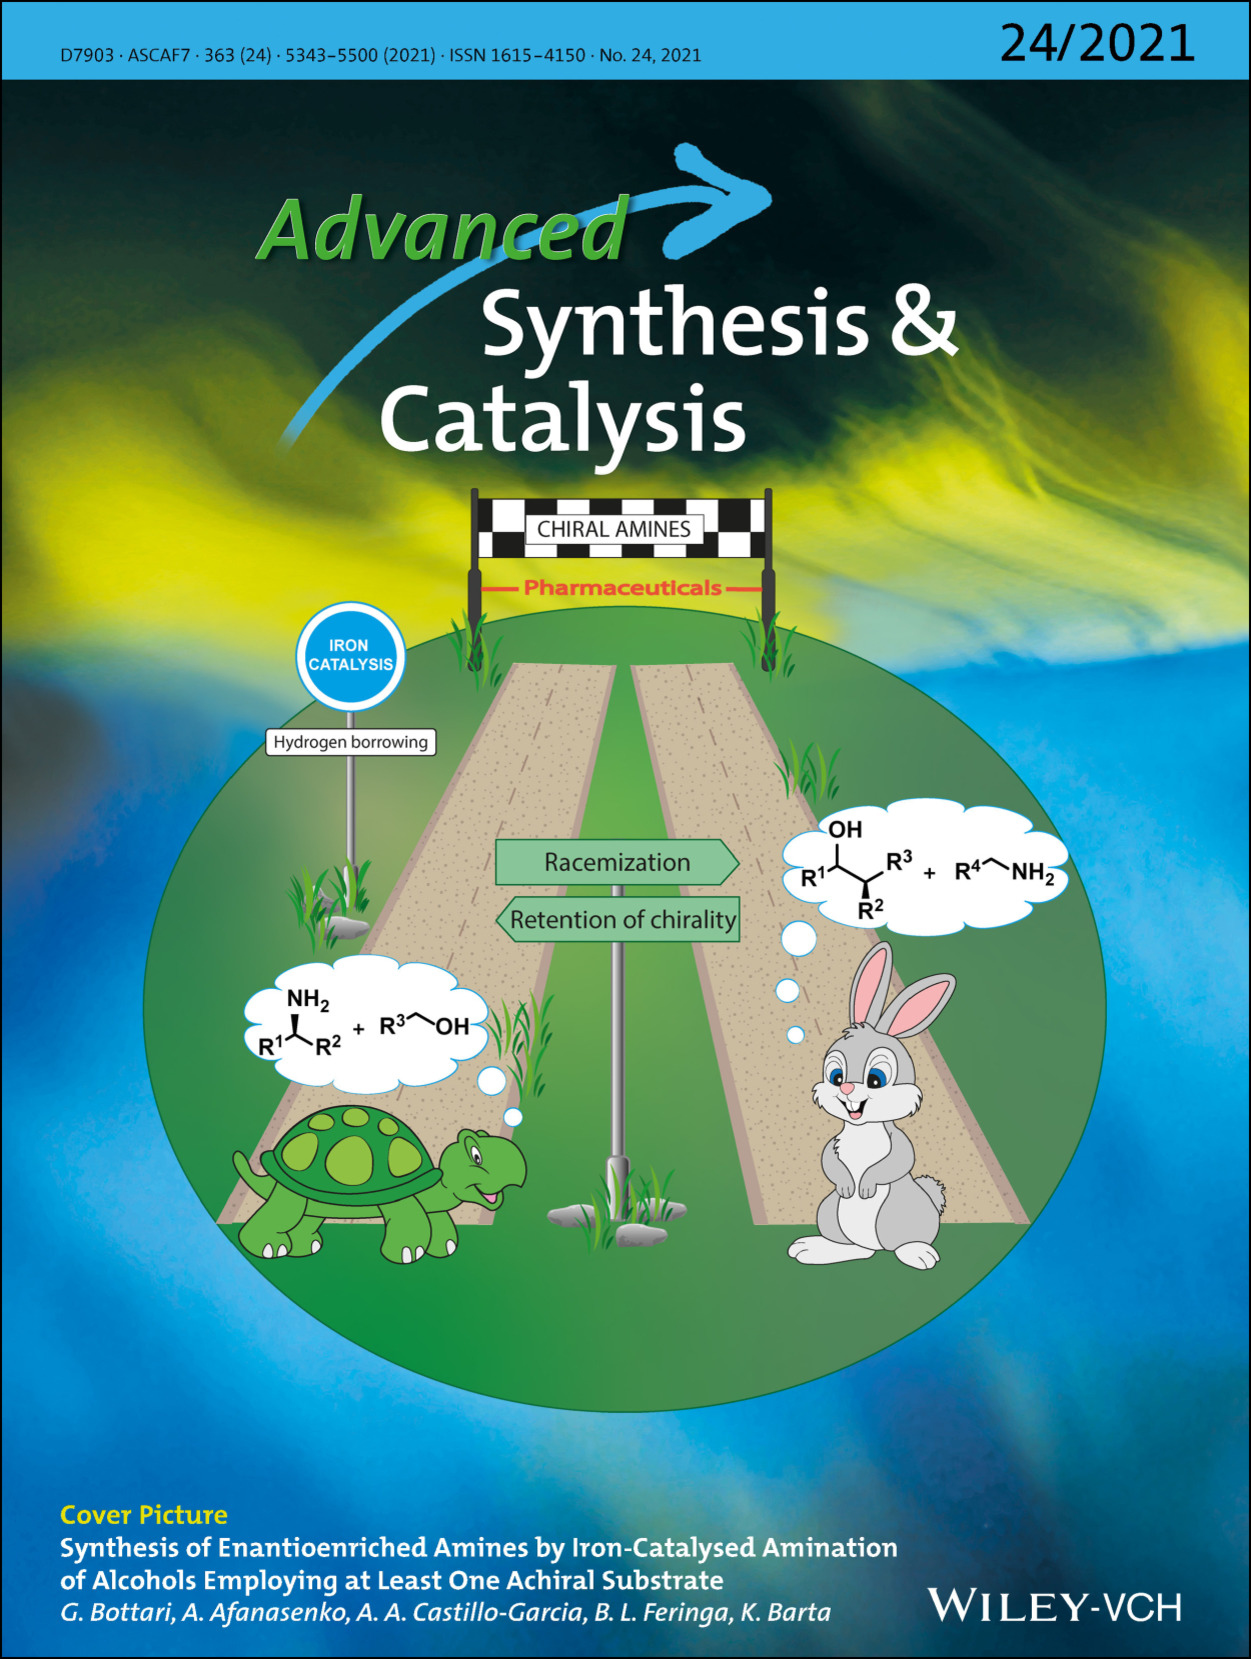 Front Cover Picture: Synthesis of Enantioenriched Amines by Iron‐Catalysed Amination of Alcohols Employing at Least One Achiral Substrate (Adv. Synth. Catal. 24/2021)